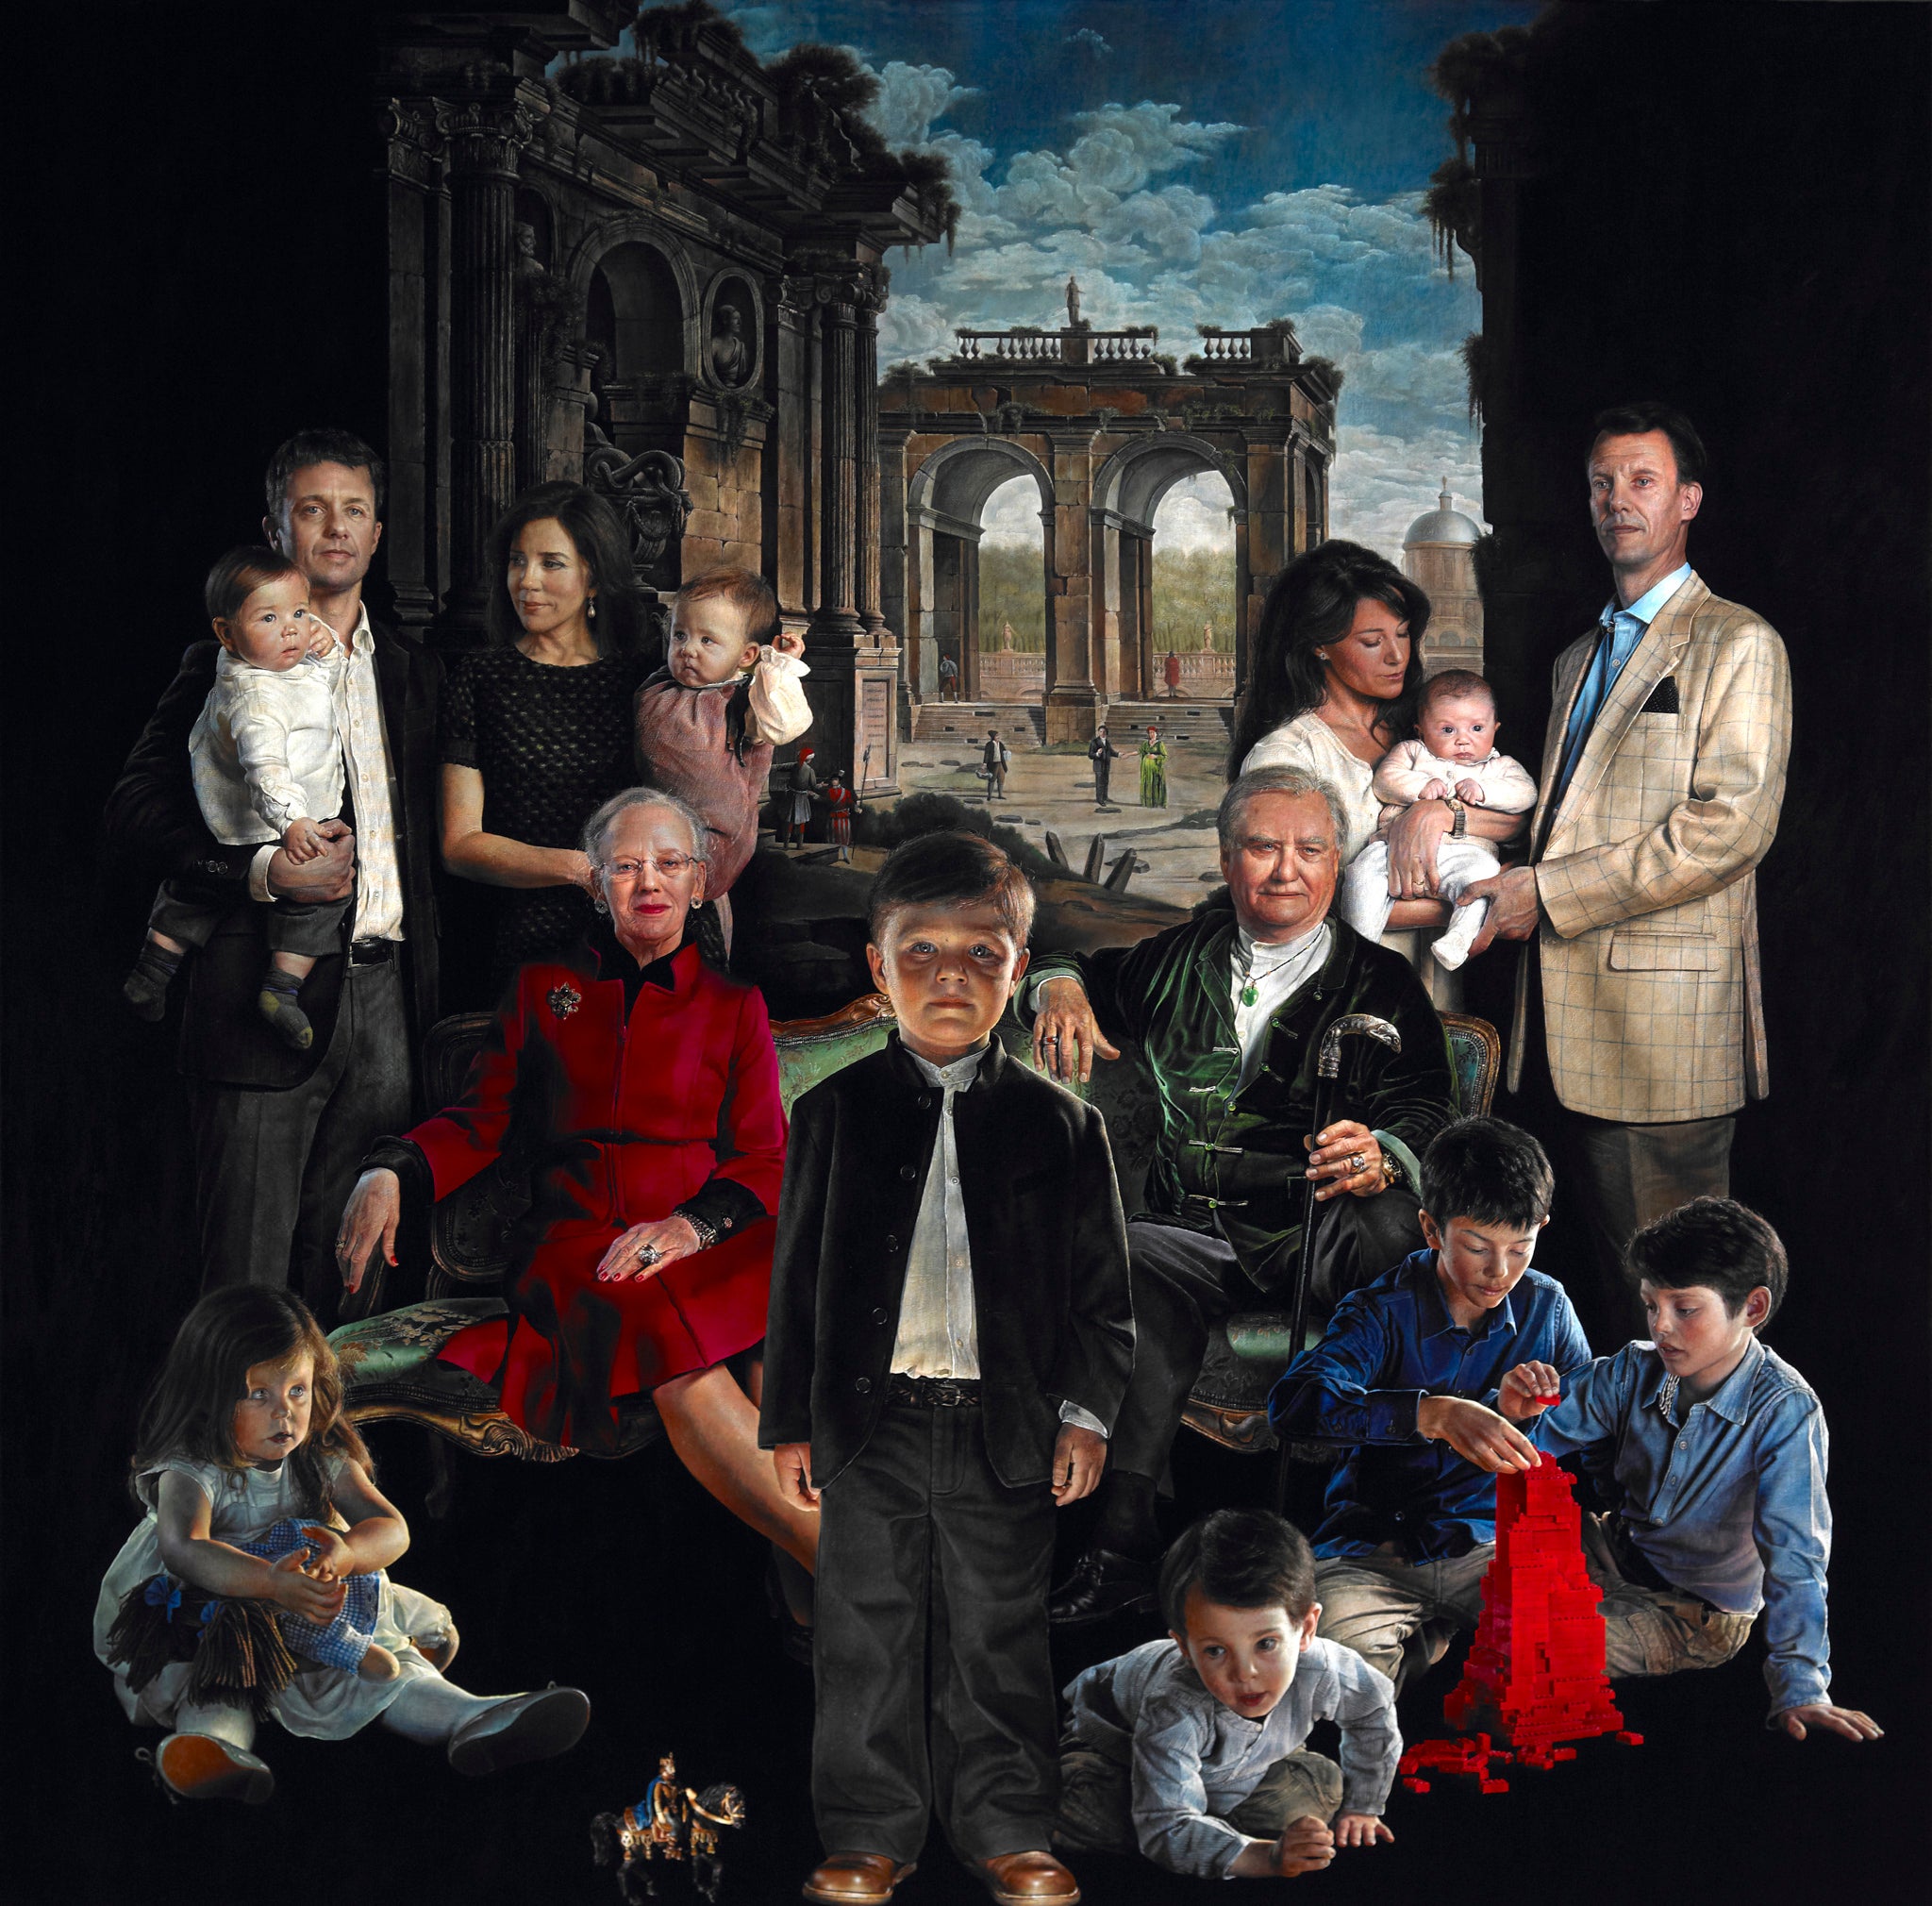 From left to right are: Princess Isabella, Crown Prince Frederik holding Prince Vincent, Princess Mary holding Princess Josephine, Queen Margrethe II, Prince Christian, Queen Margrethe’s husband Prince Henrik, Prince Henrik – son of Joachim, Princess Mari